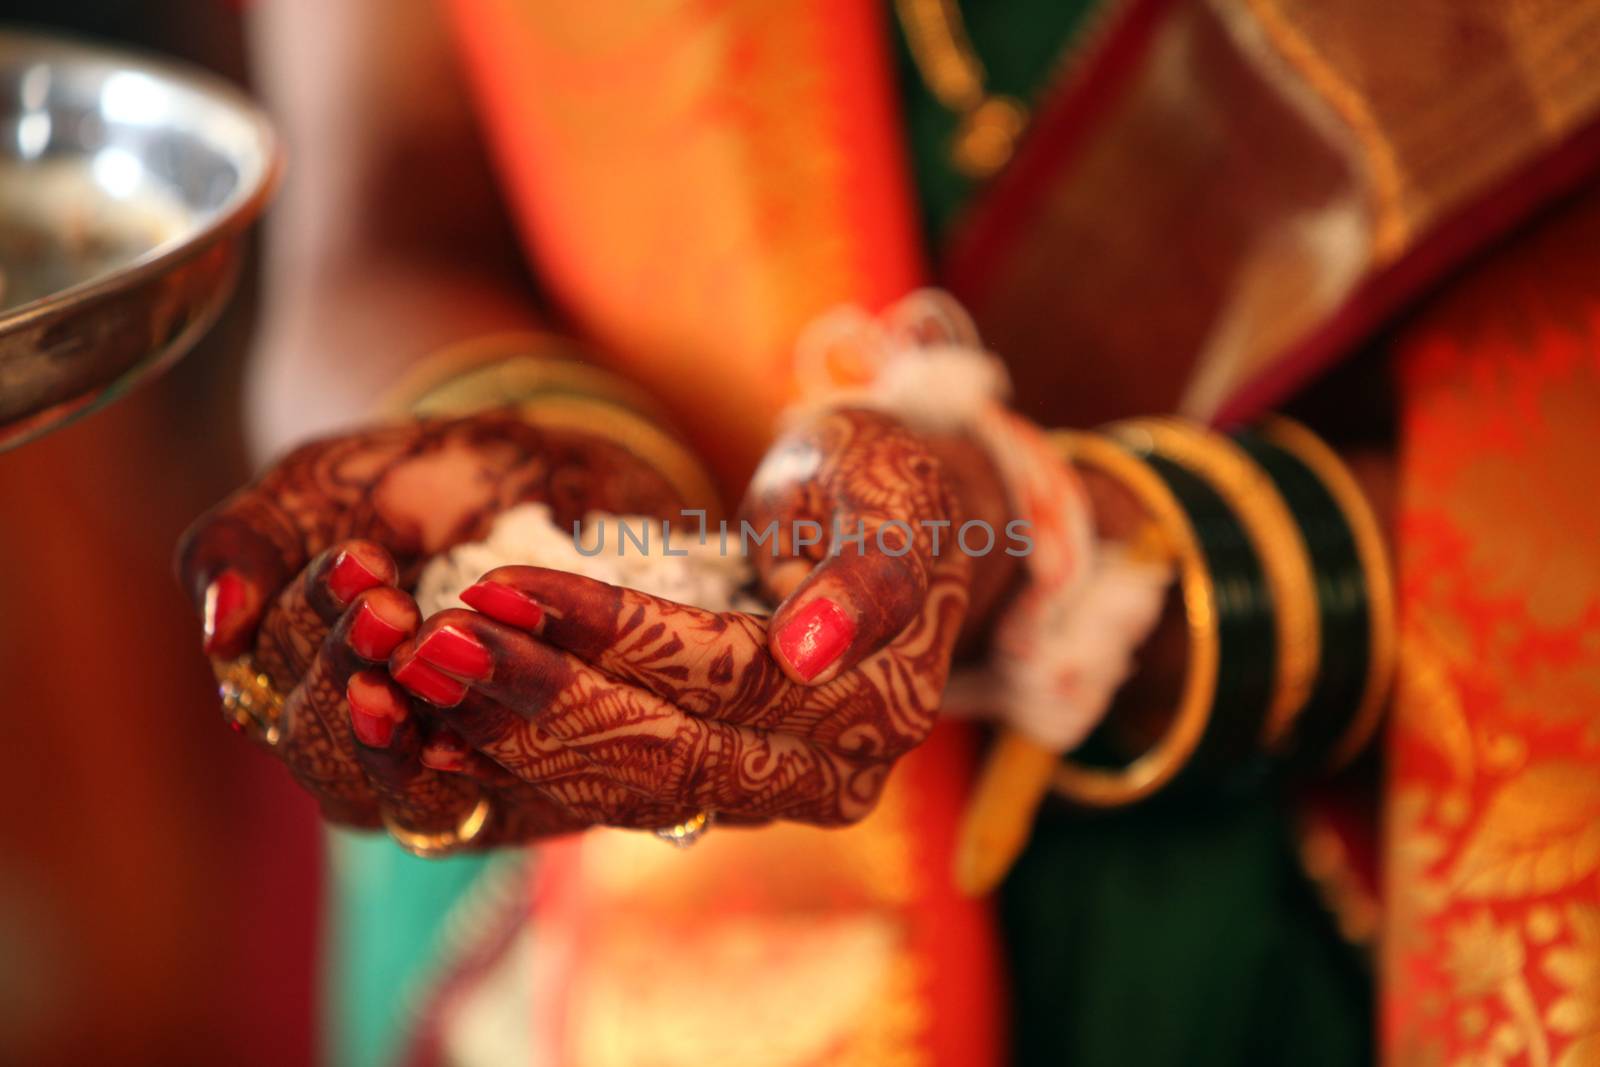 A bride's hand decorated with Mehendi/Henna holding holy food during a traditional Hindu wedding ritual.